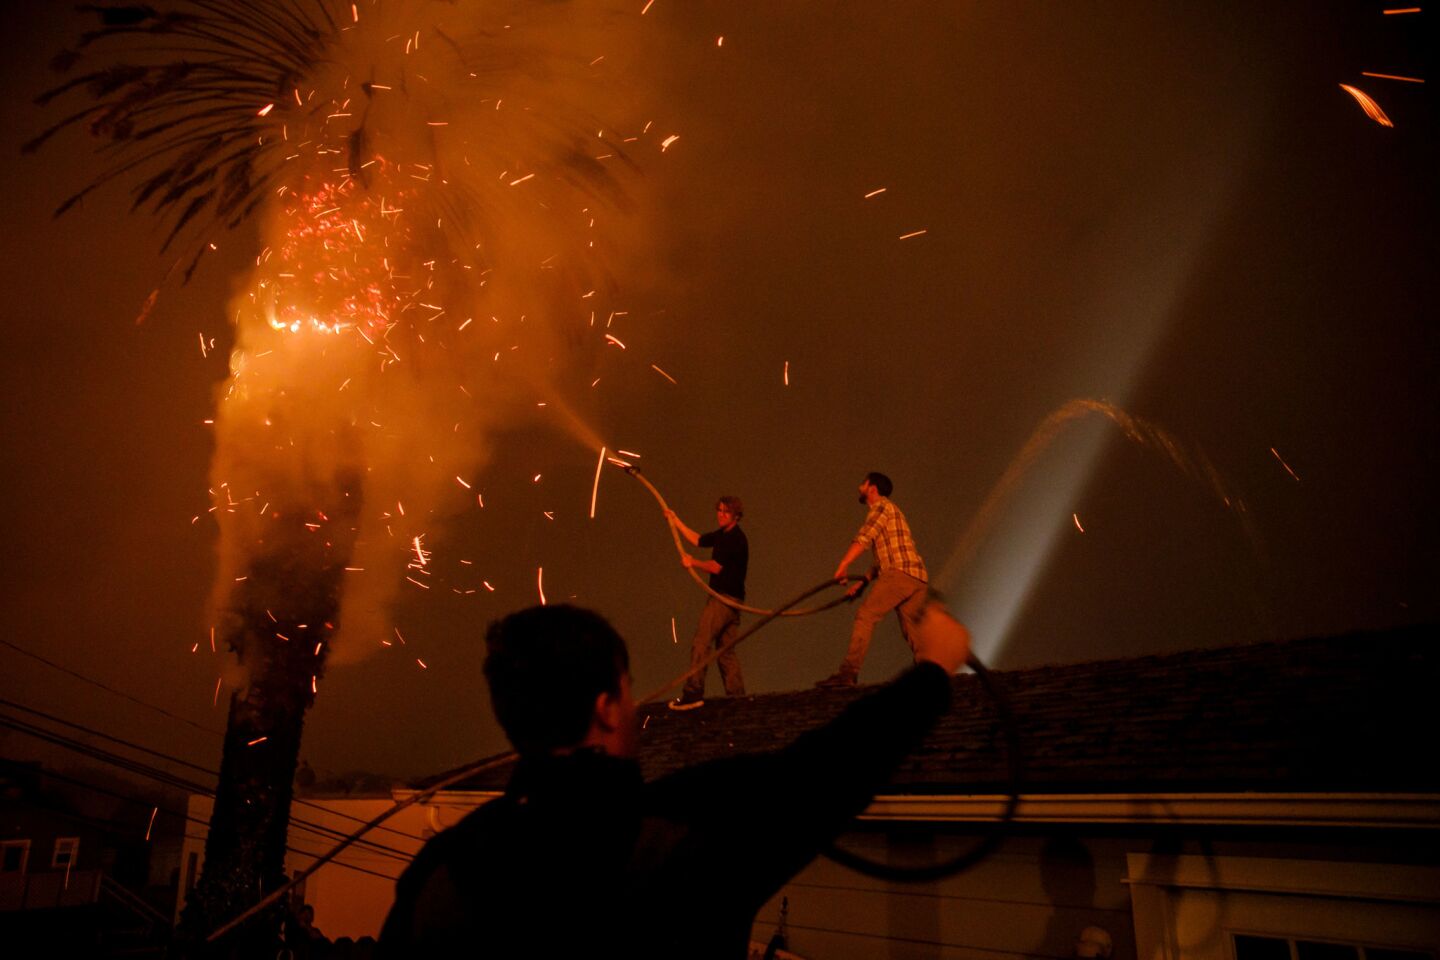 Strangers band together to help put out a palm tree on fire and stop it from burning homes.